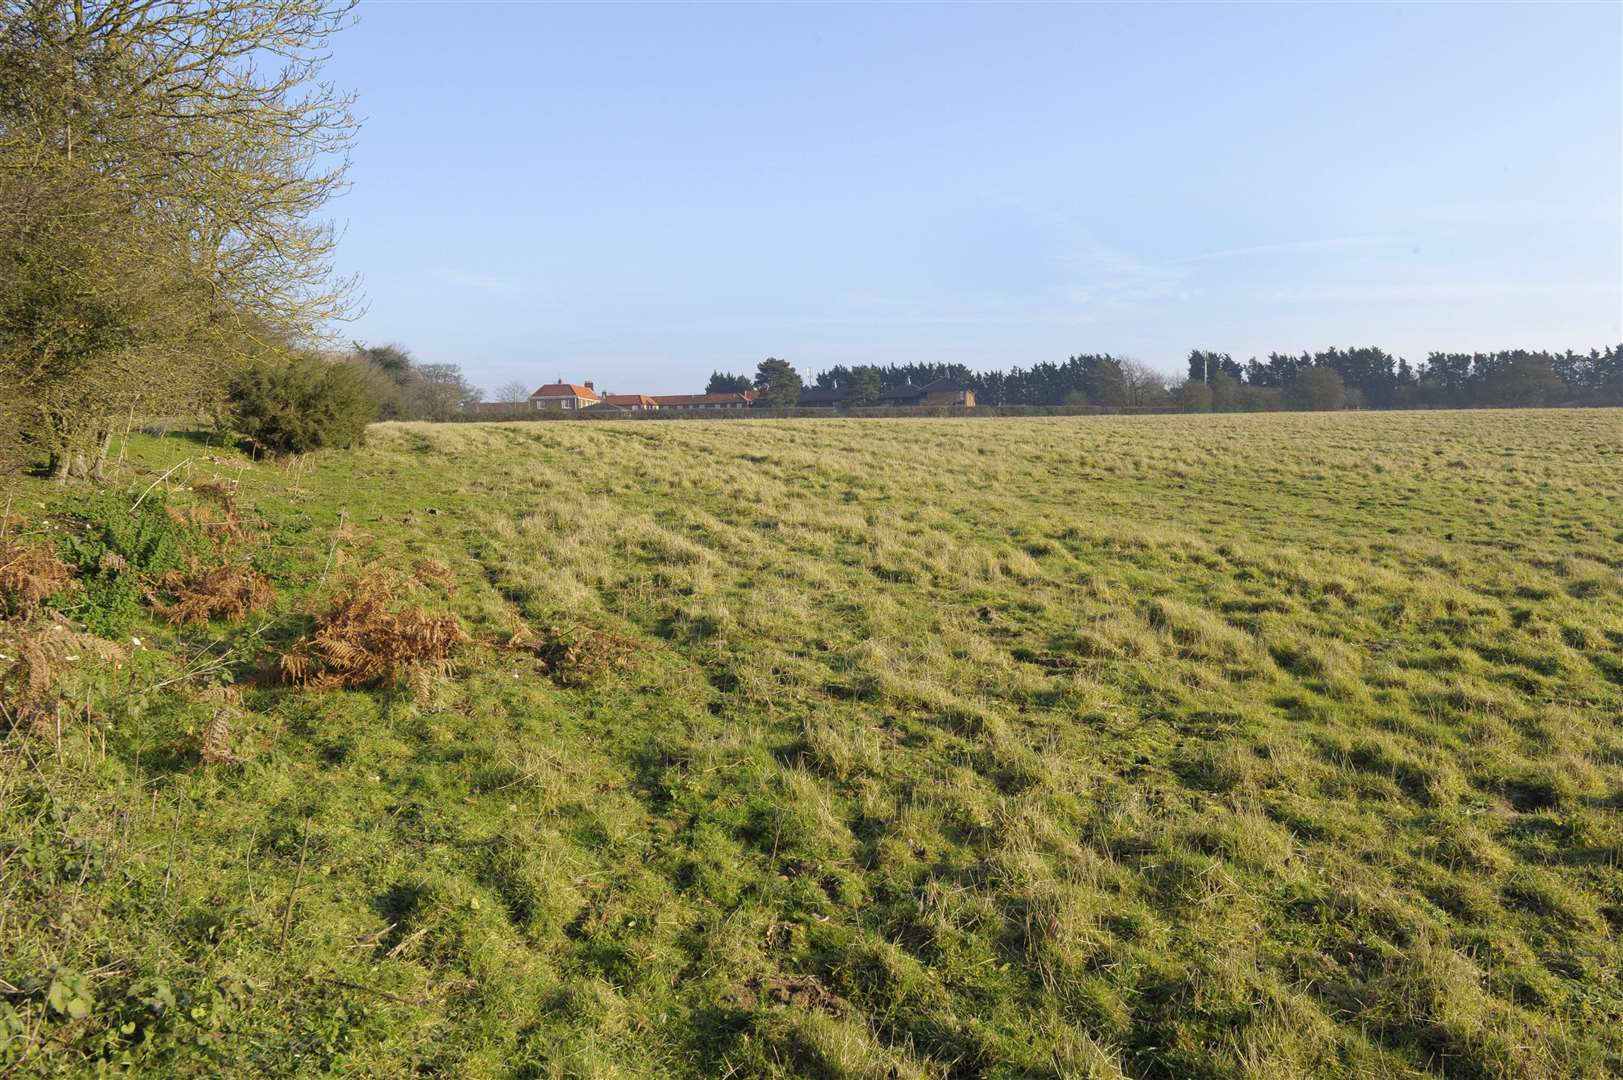 Part of the site of the major planning application to build almost 600 homes on the outskirts of Lynn